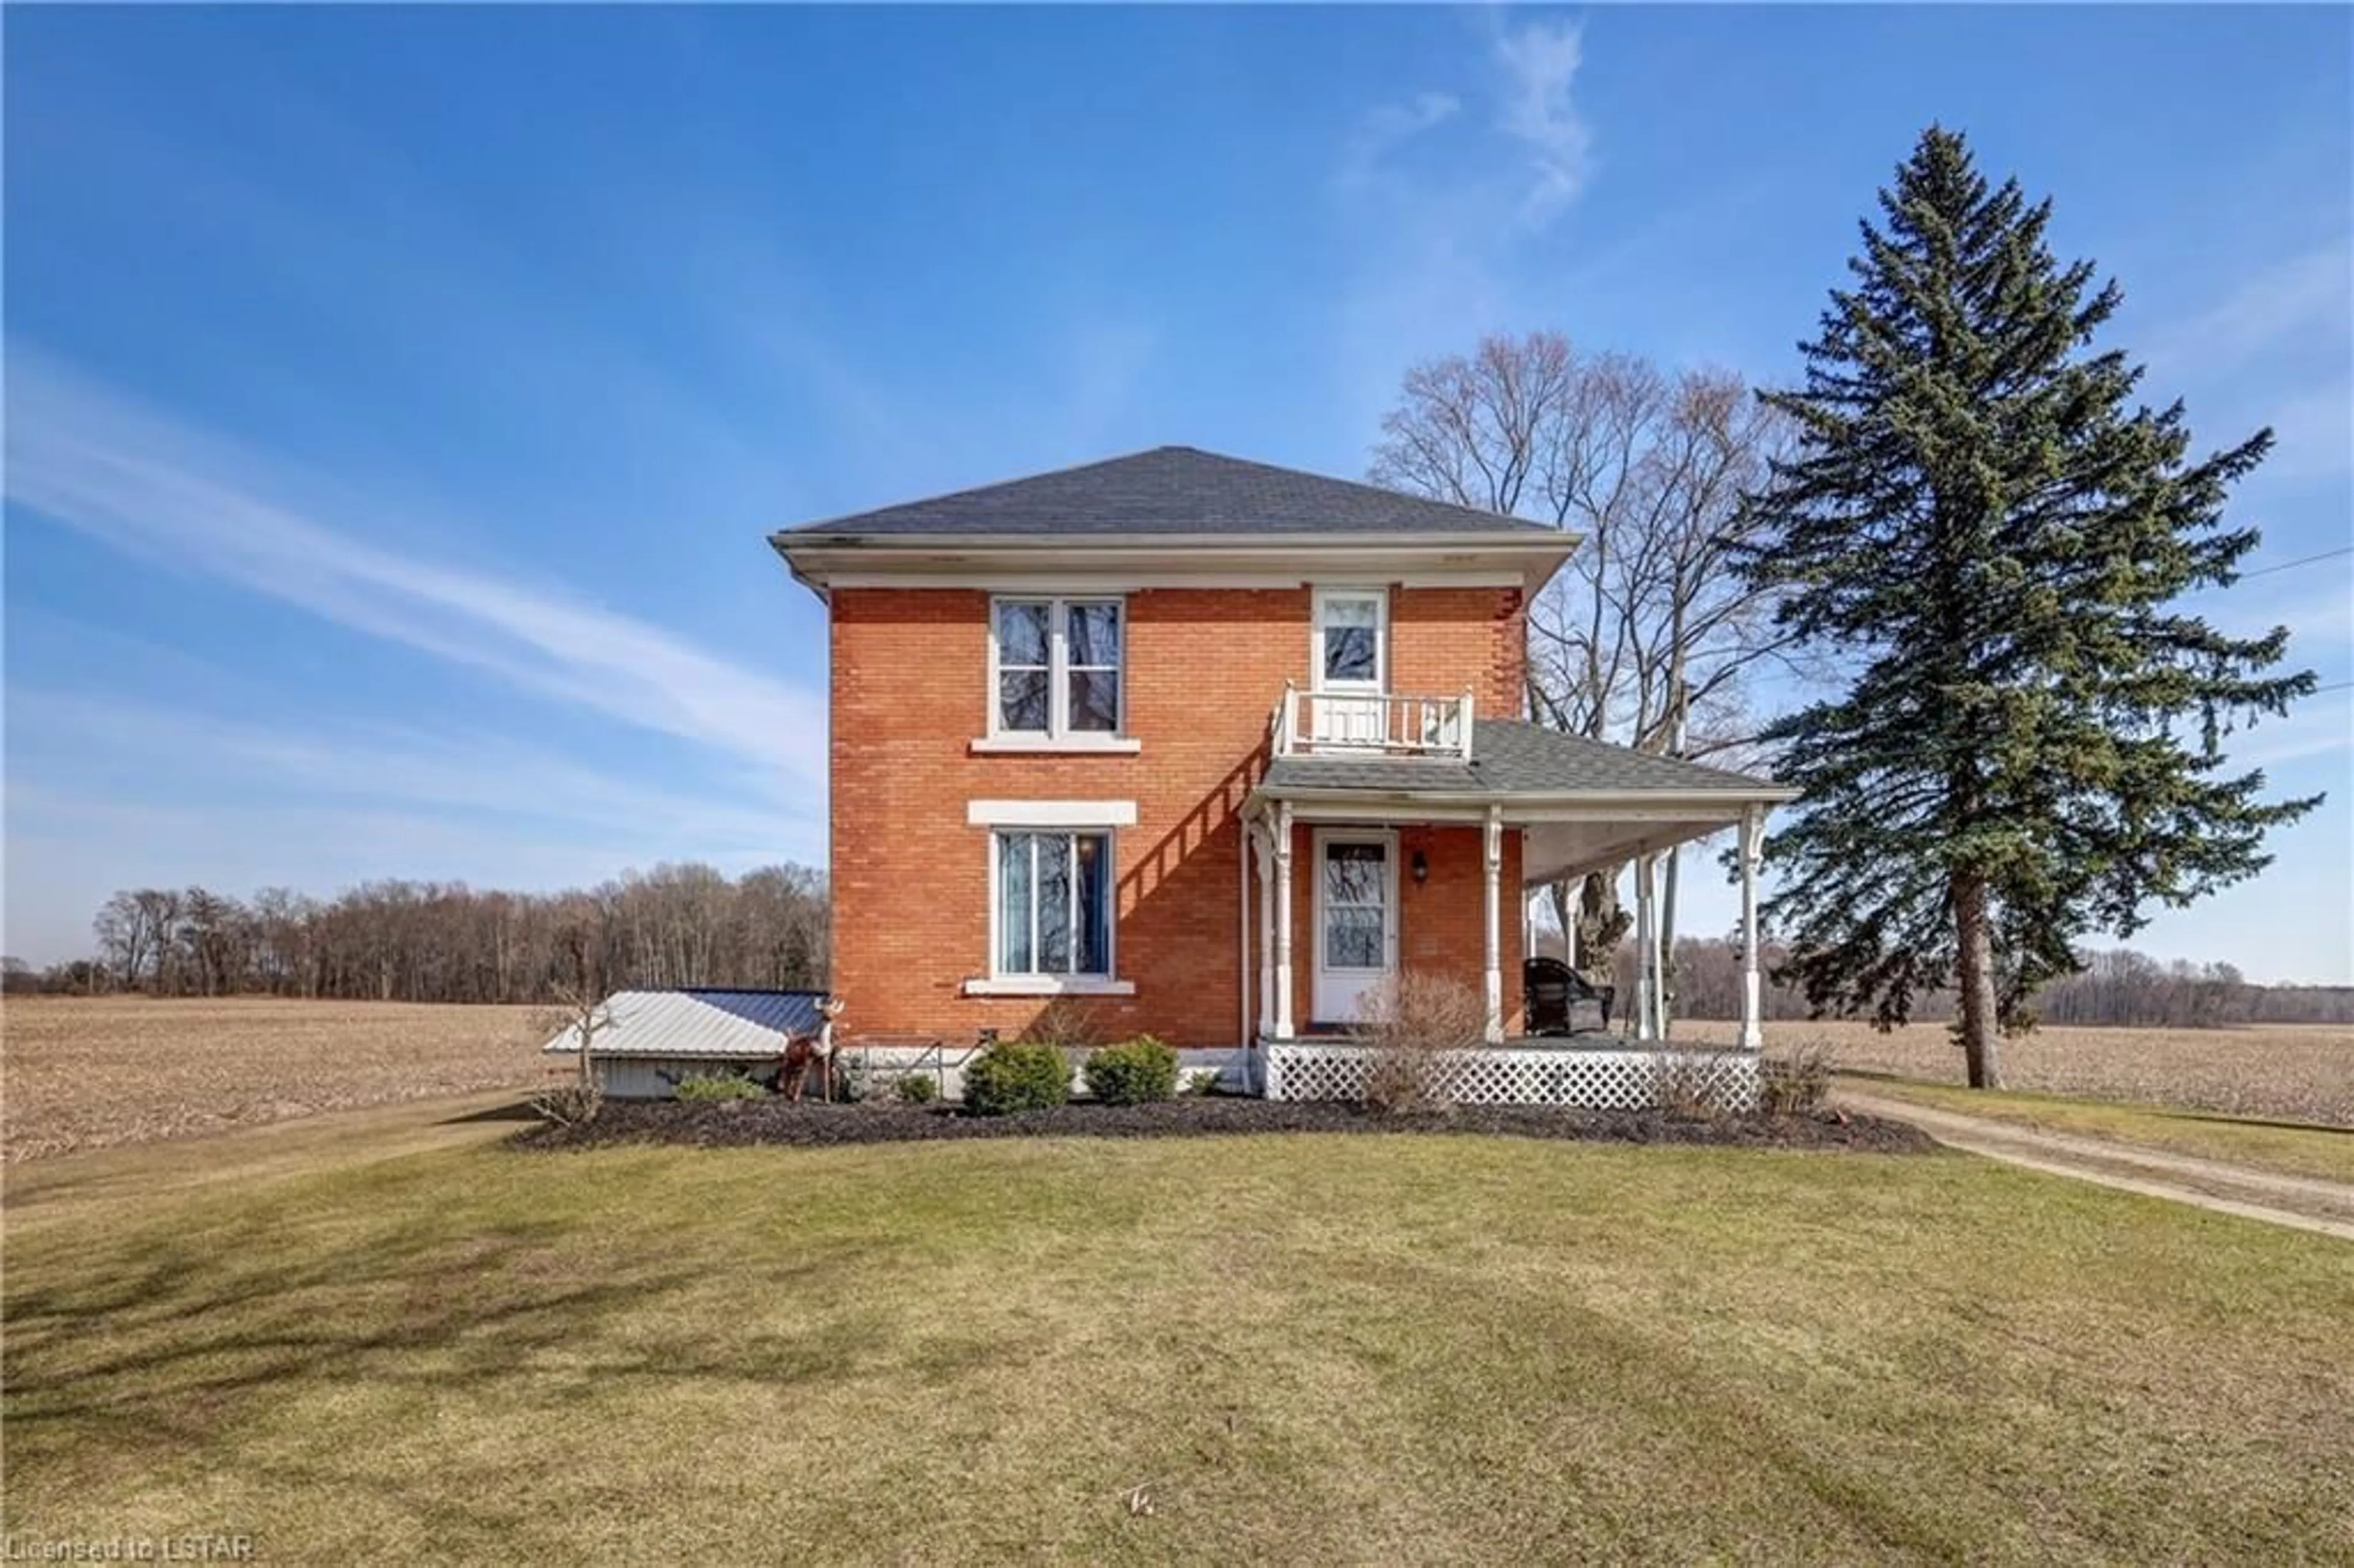 Home with brick exterior material for 7086 Springfield Rd, Aylmer Ontario N5H 2R5